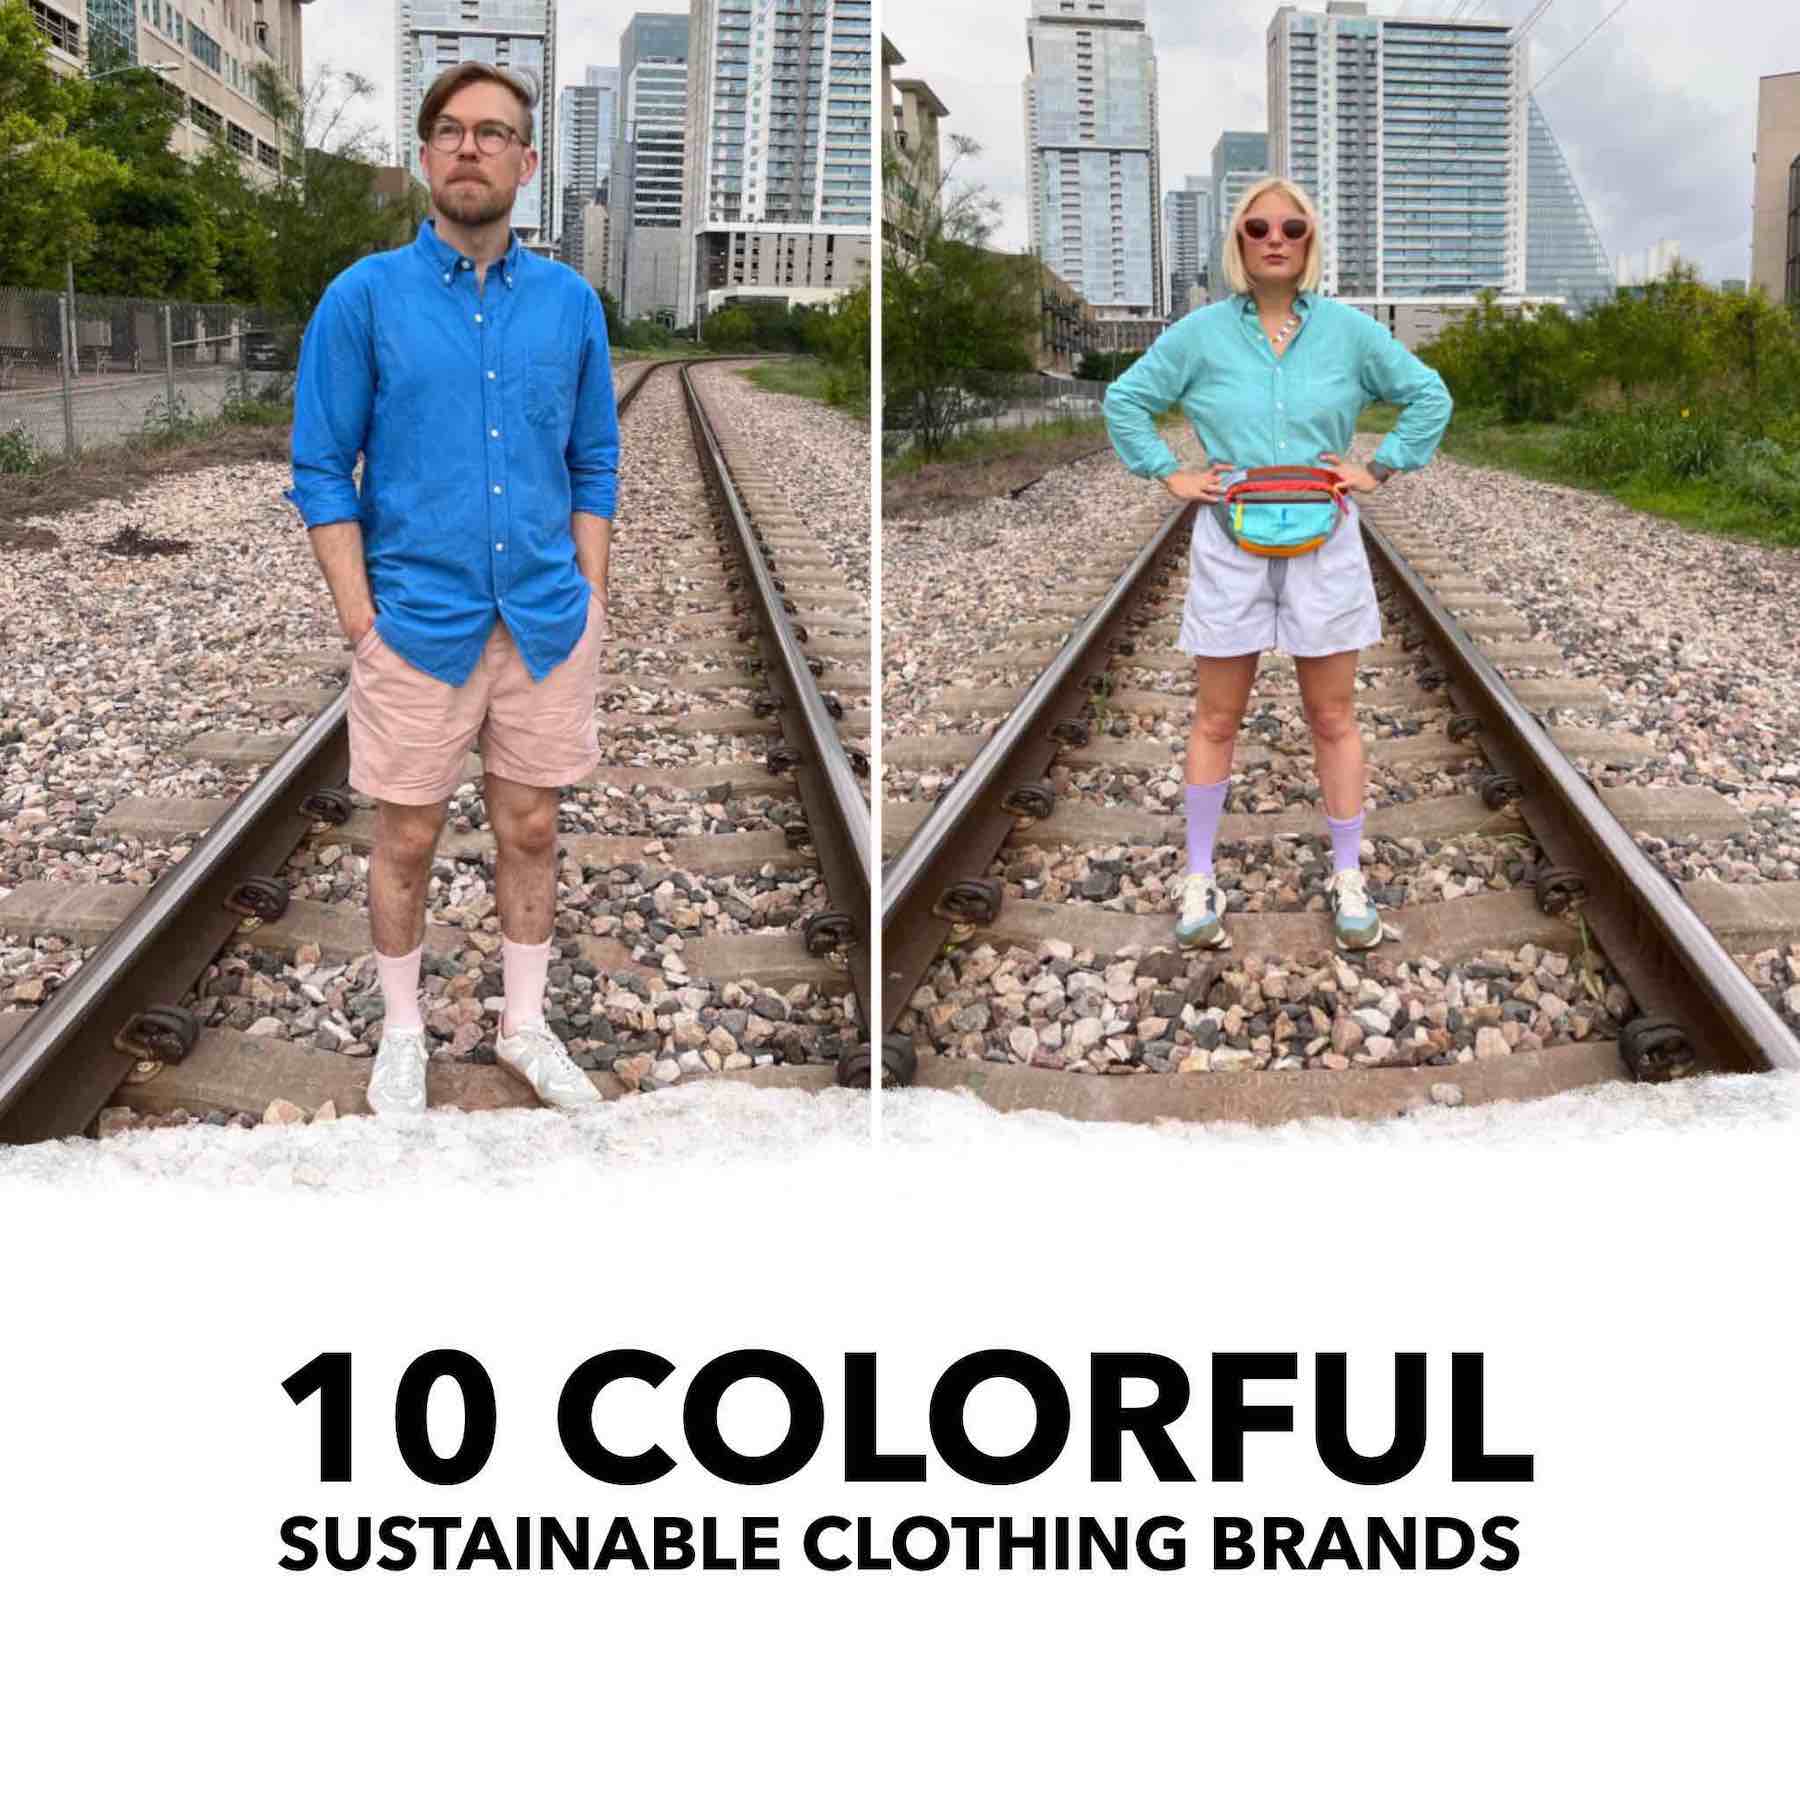 Guide to Colorful Ethical Fashion-10 Colorful Sustainable Clothing Brands